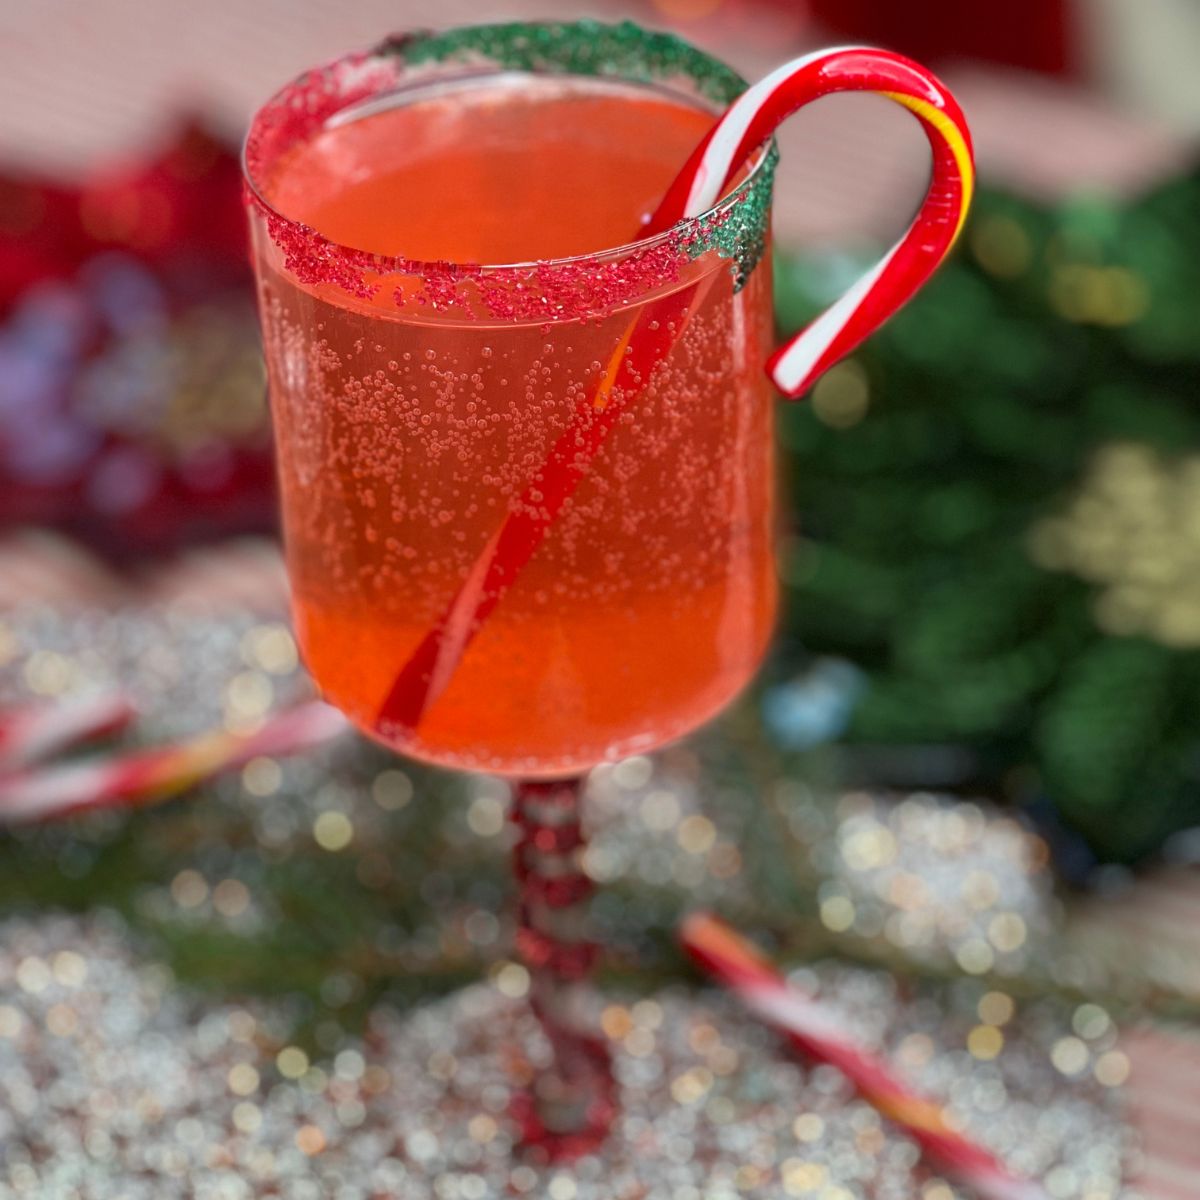 Zero calorie mocktail in a clear glass with a candy cane stir